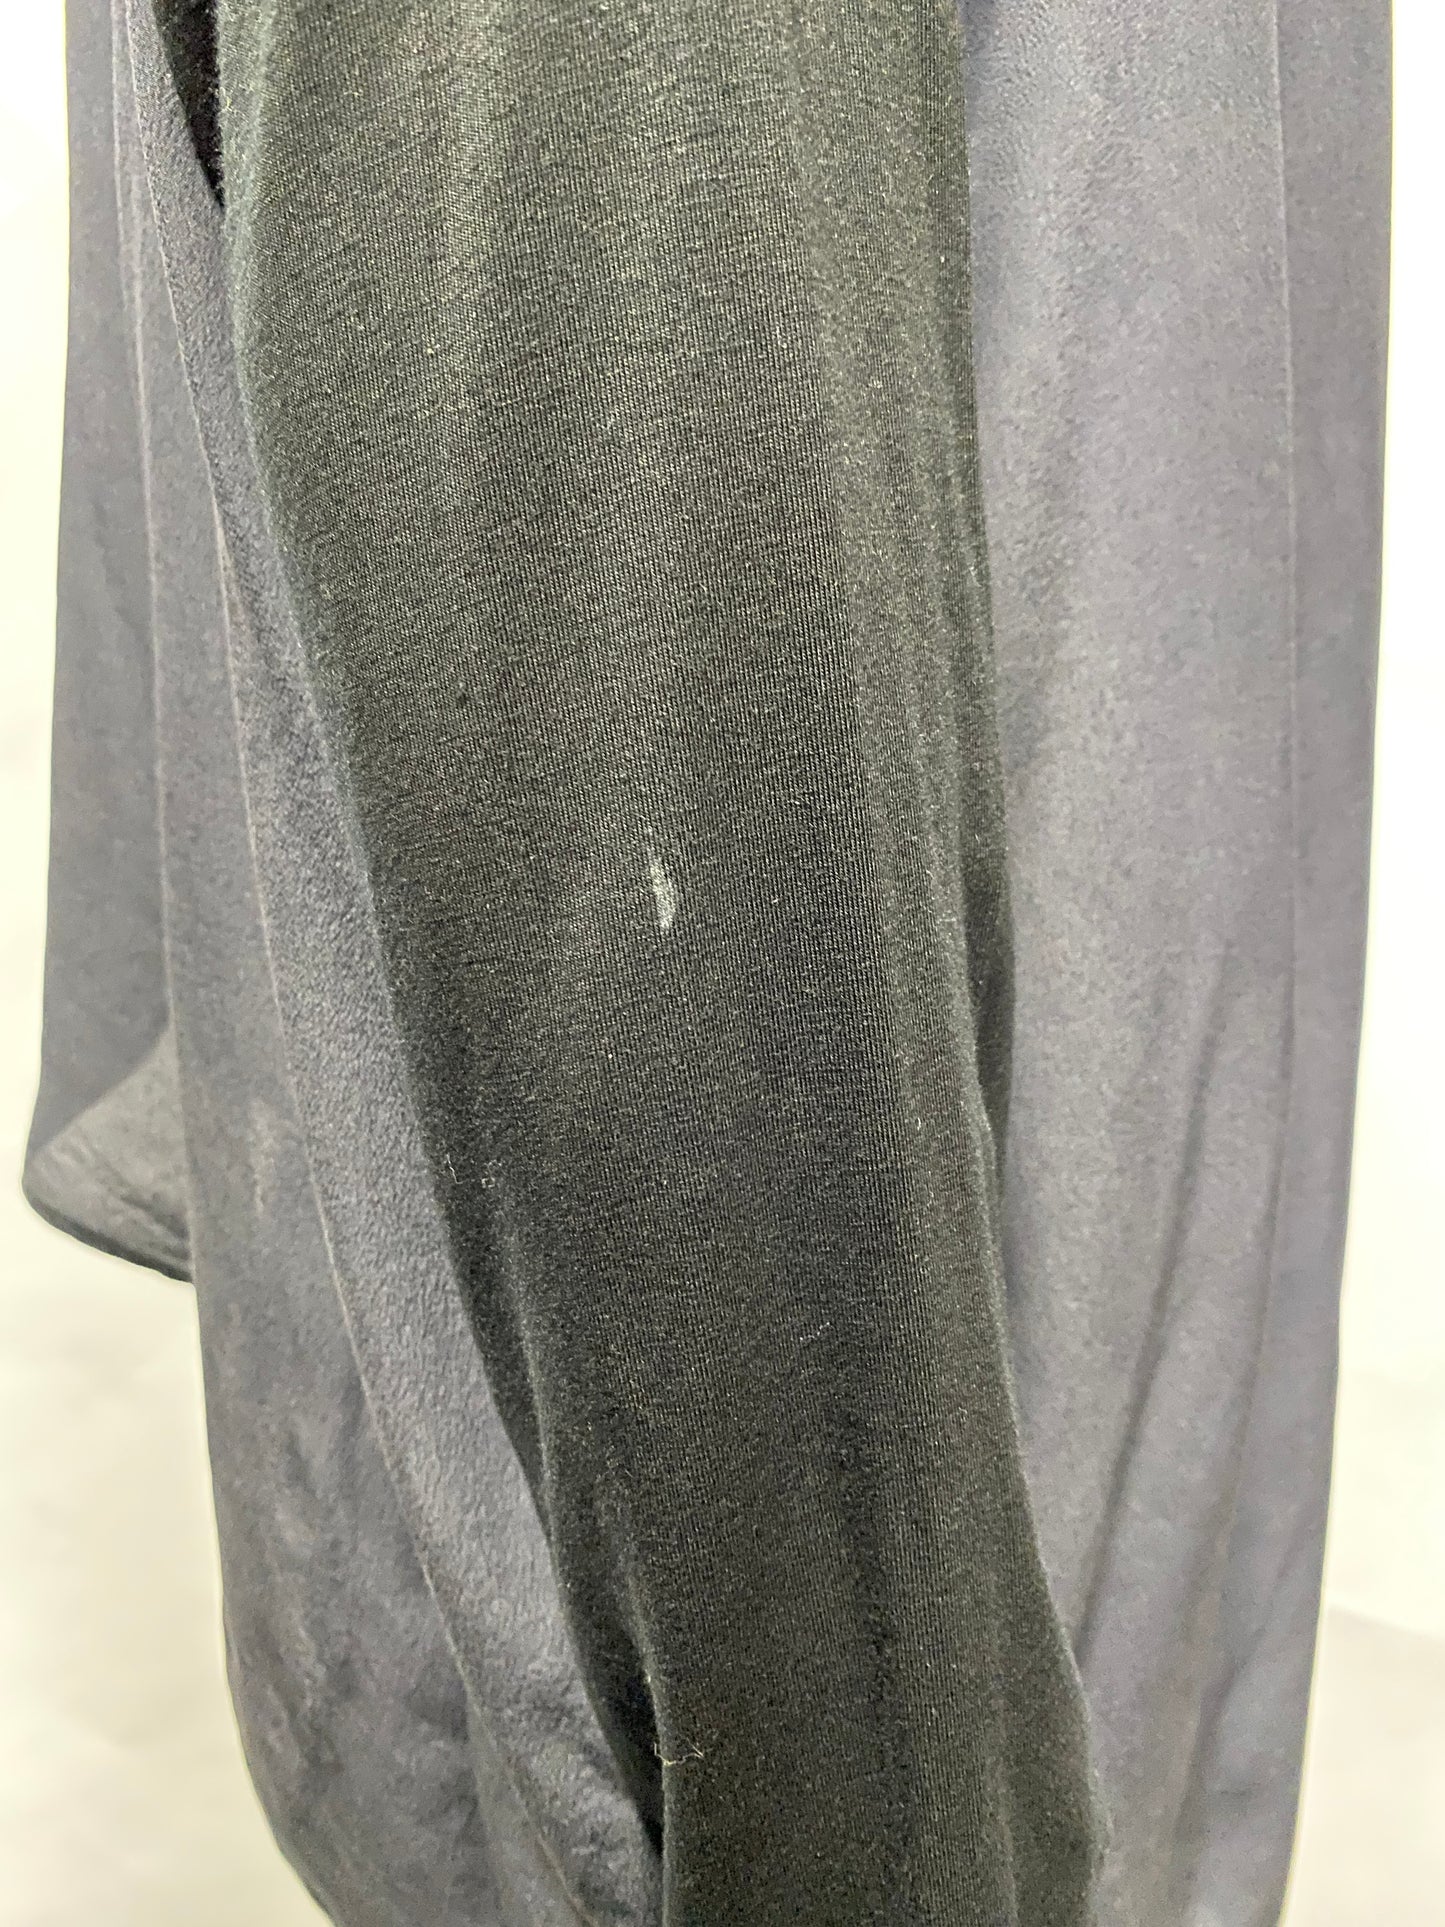 Nique Charcoal and Black Silk Top 12